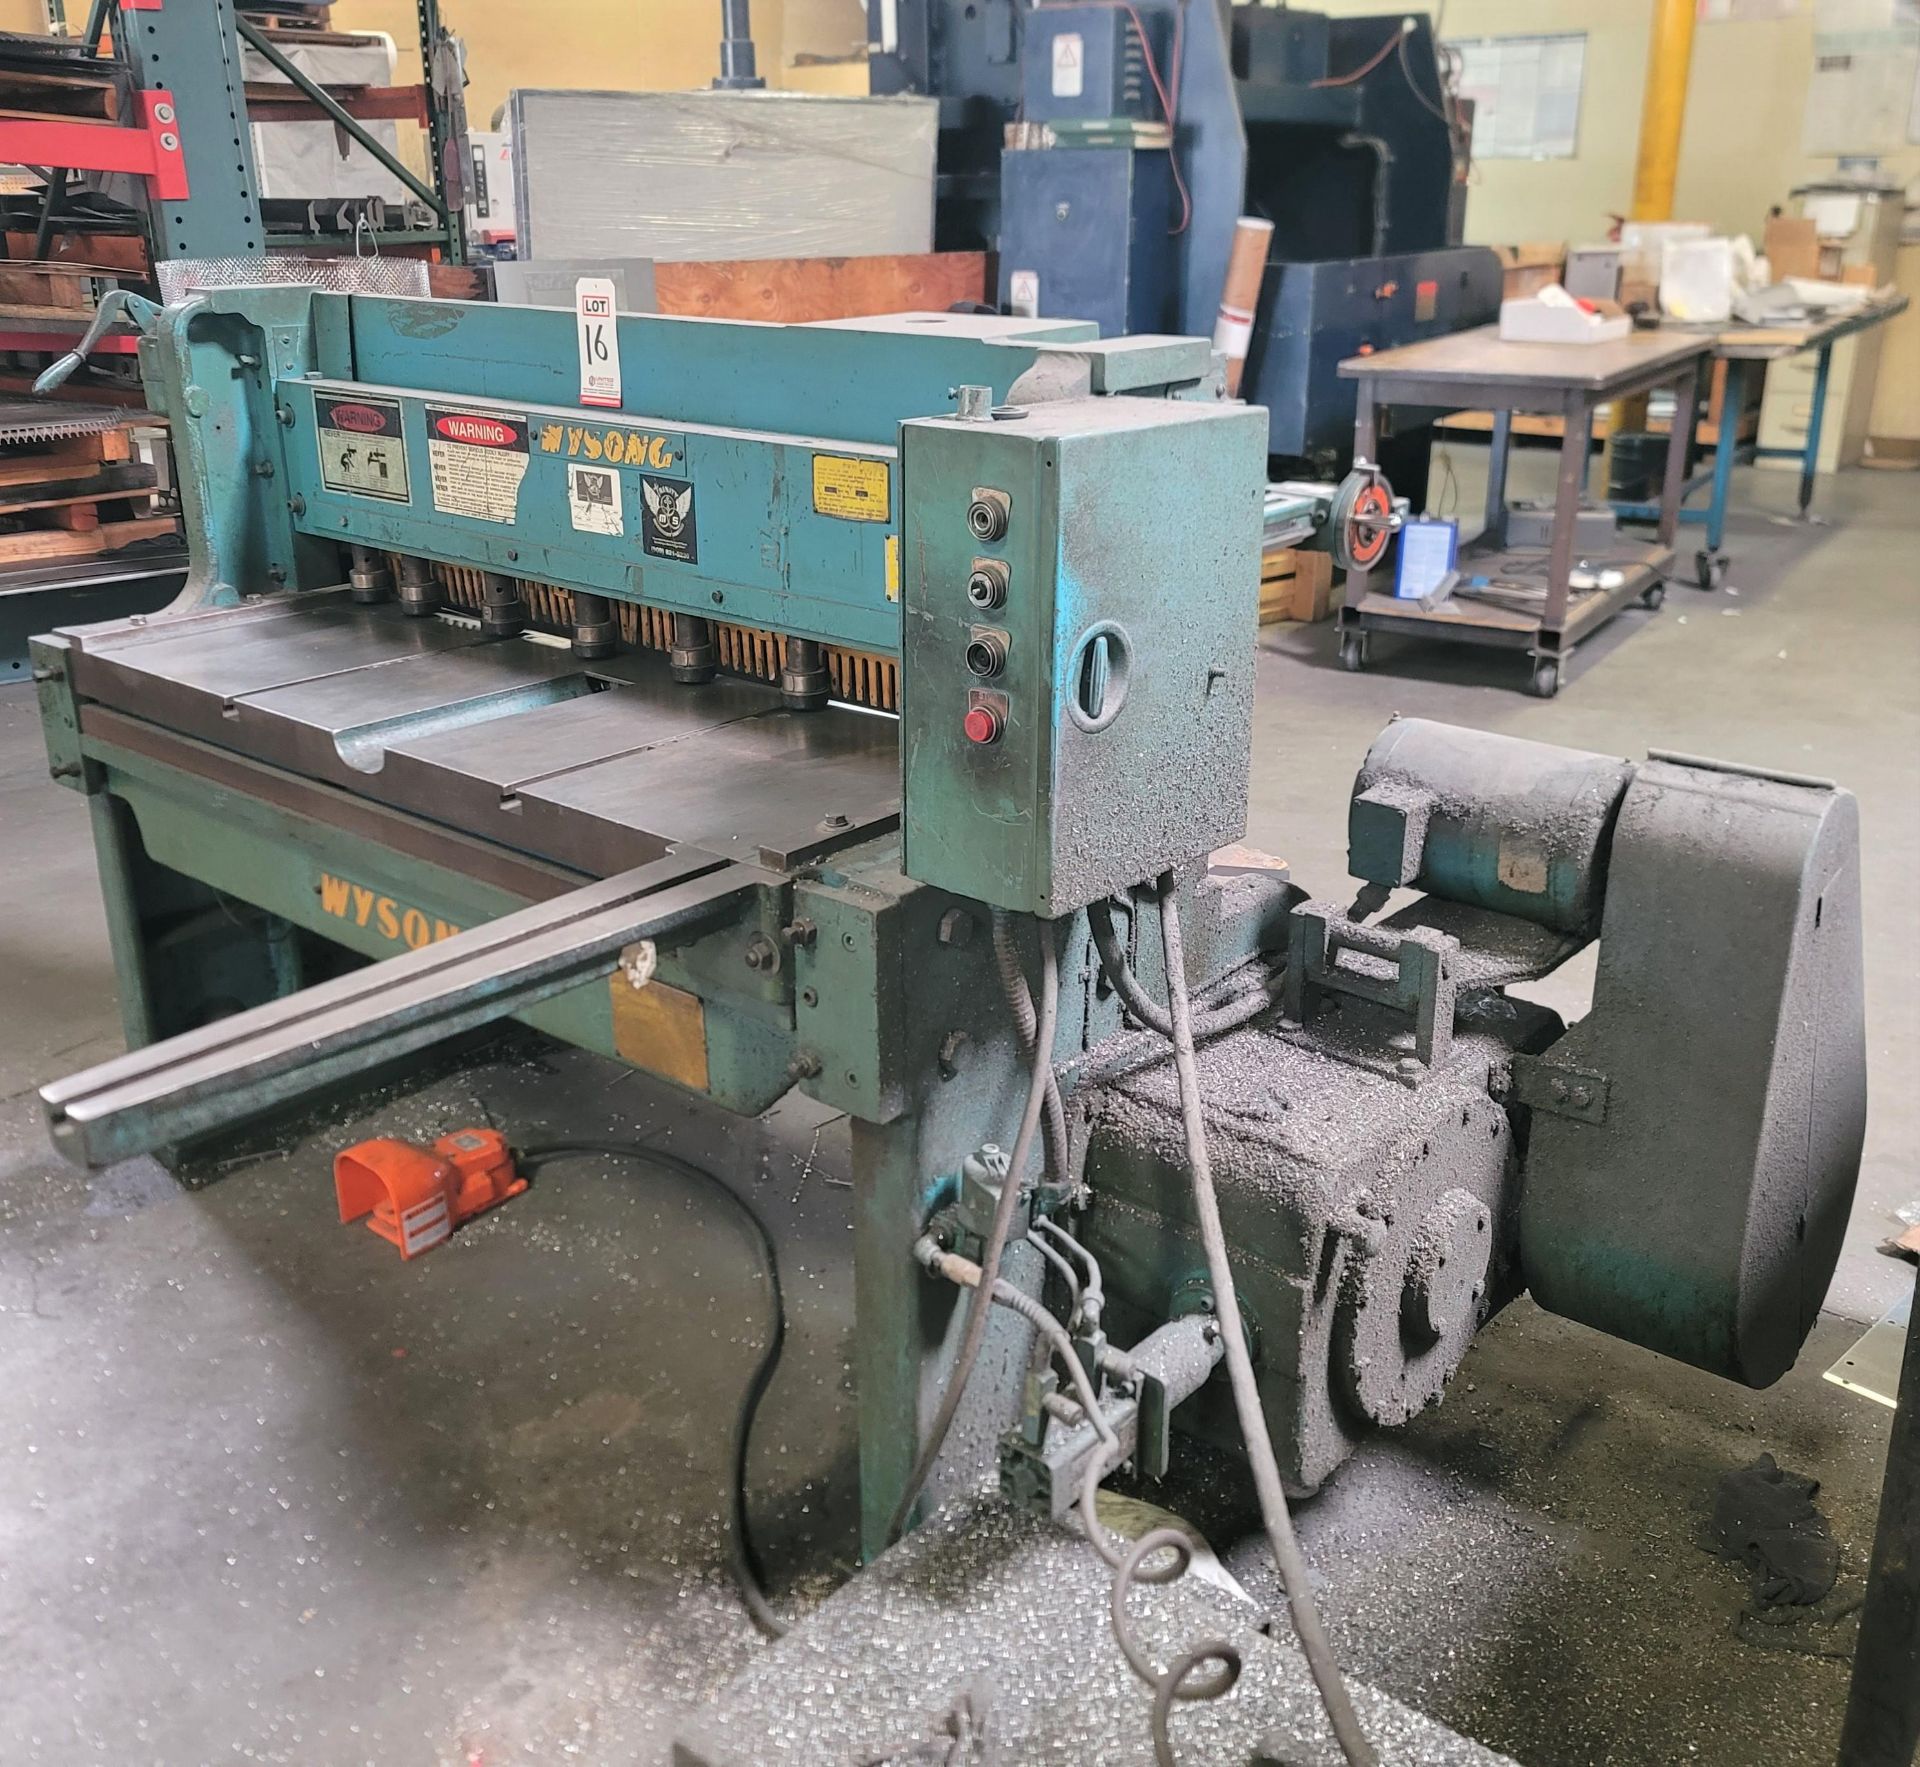 WYSONG 52" POWER SHEAR, MODEL 1252-HD, 10 GAGE X 4' CAPACITY, MECHANICAL, SQUARING ARM, S/N P13- - Image 2 of 5